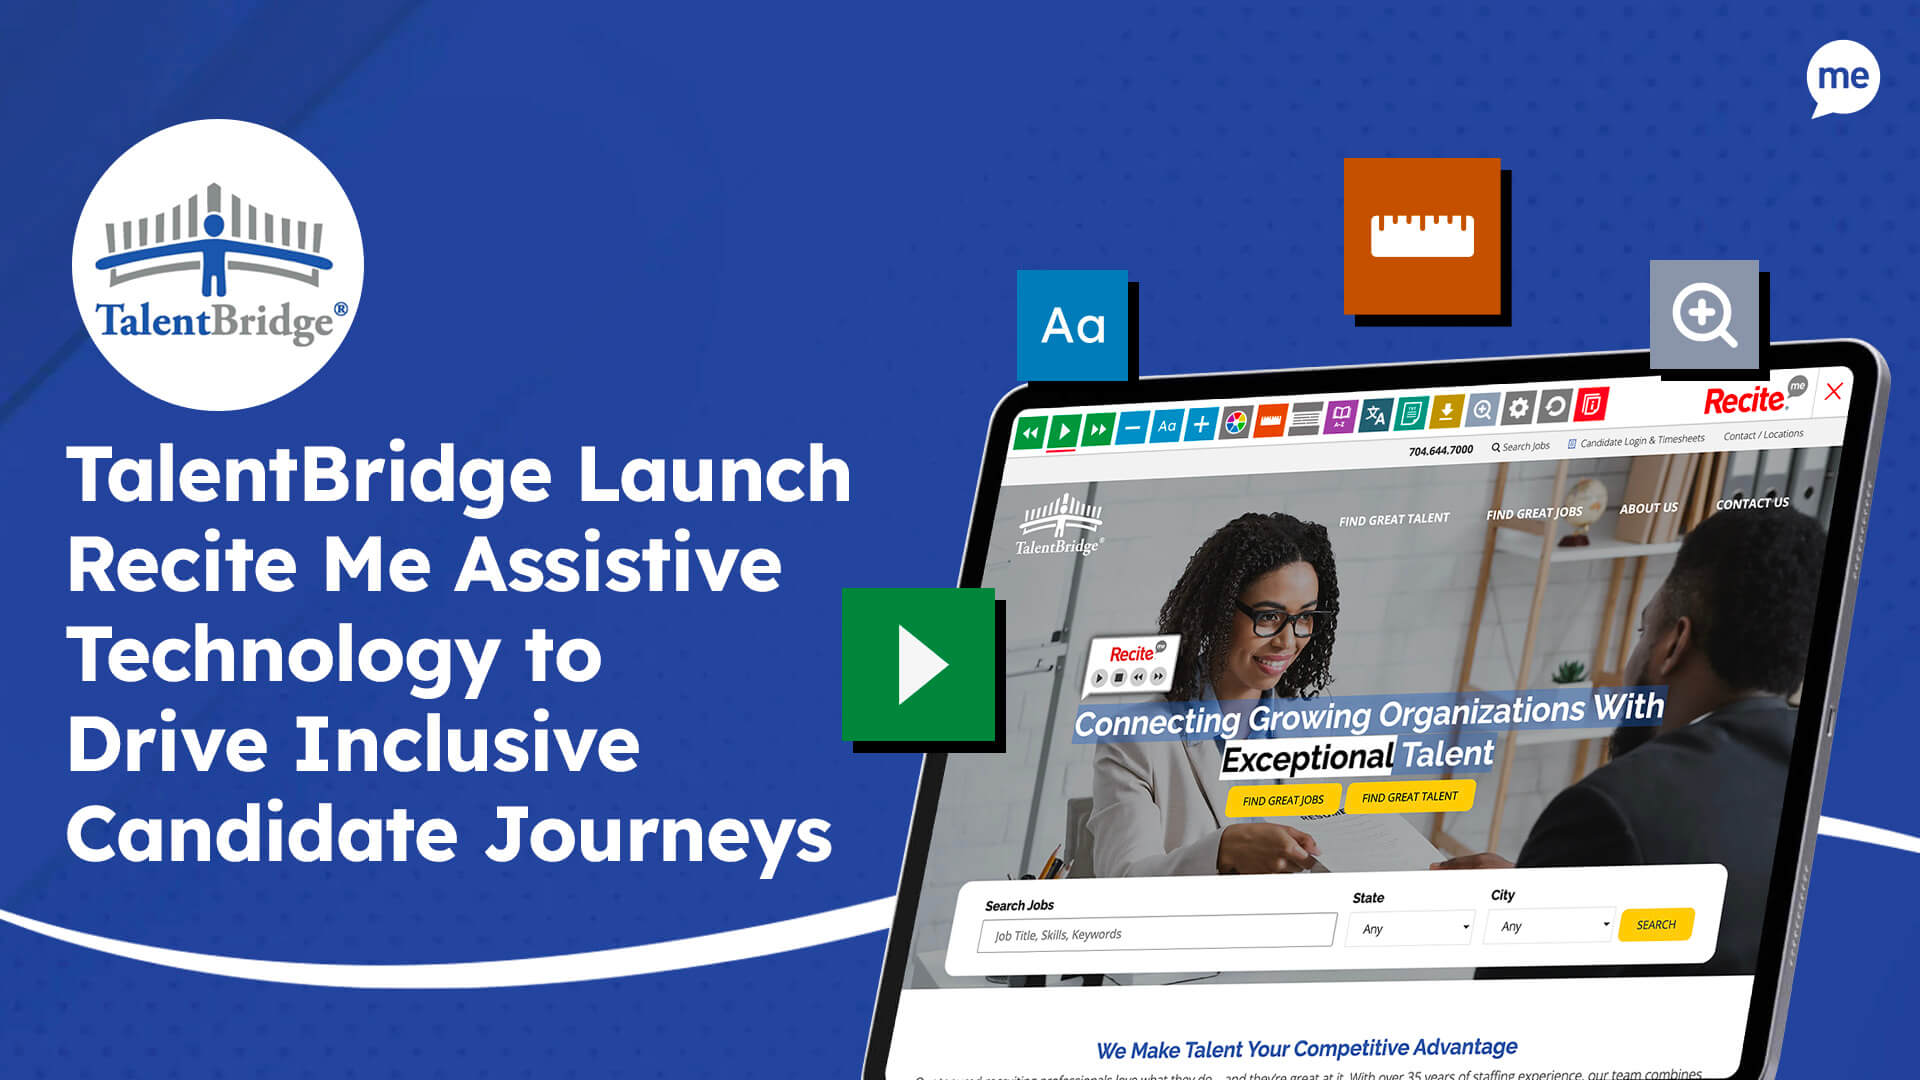 TalentBridge Launch Recite Me Assistive Technology to Drive Inclusive Candidate Journeys with a laptop with screenshot of TalentBridge website and some Recite Me toolbar features floating around the laptop